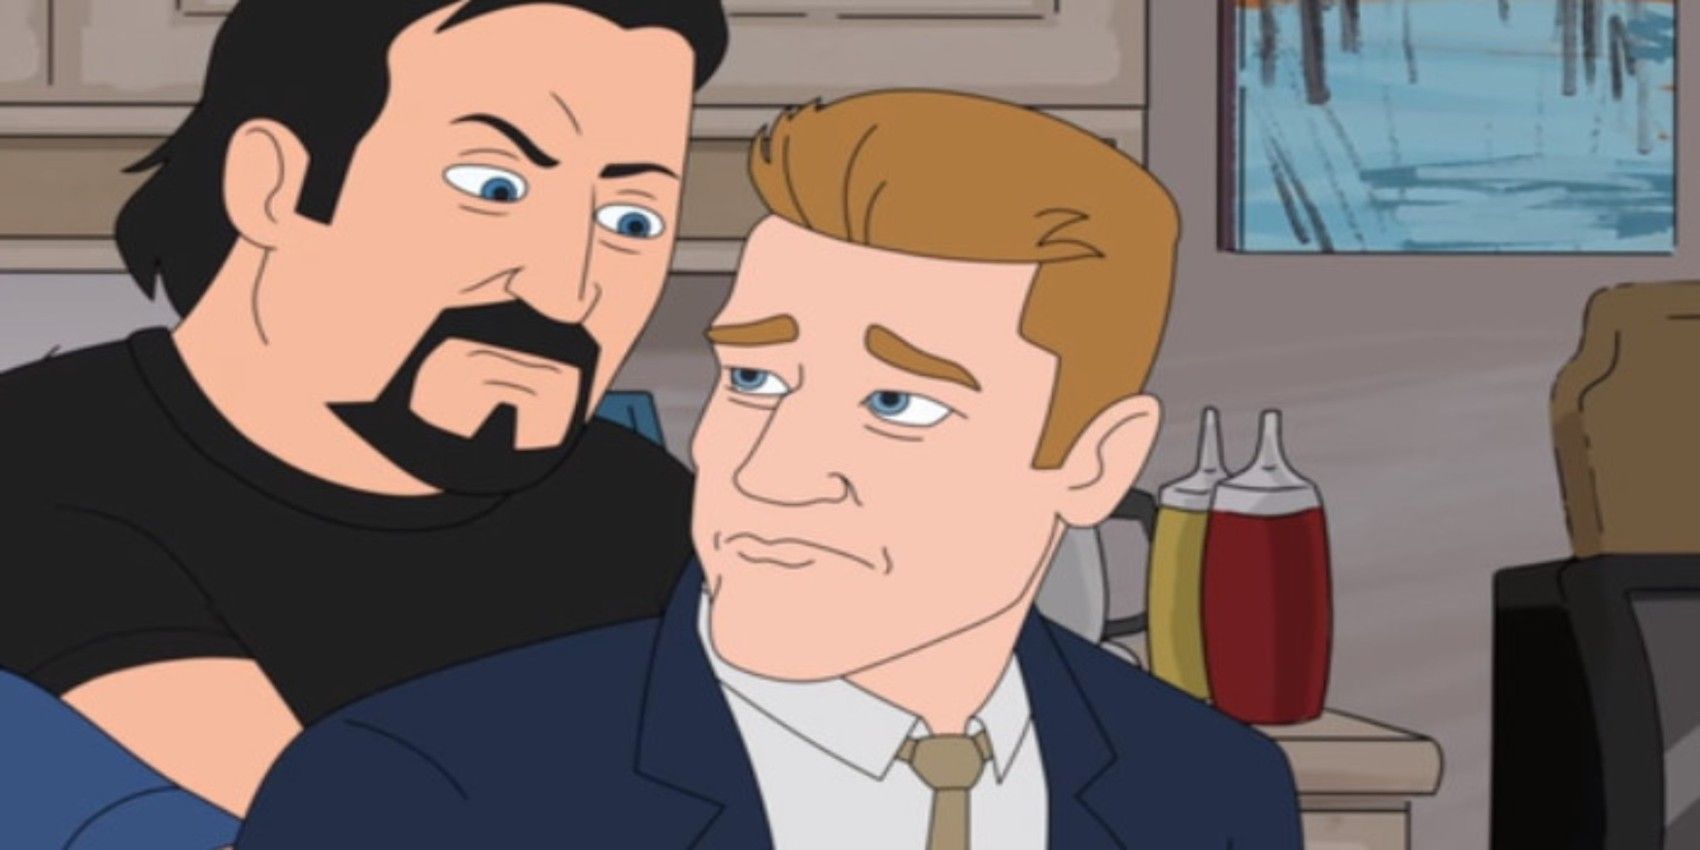 Trailer Park Boys 5 Storylines That Were Never Resolved & 5 That The Animated Series Wraps Up